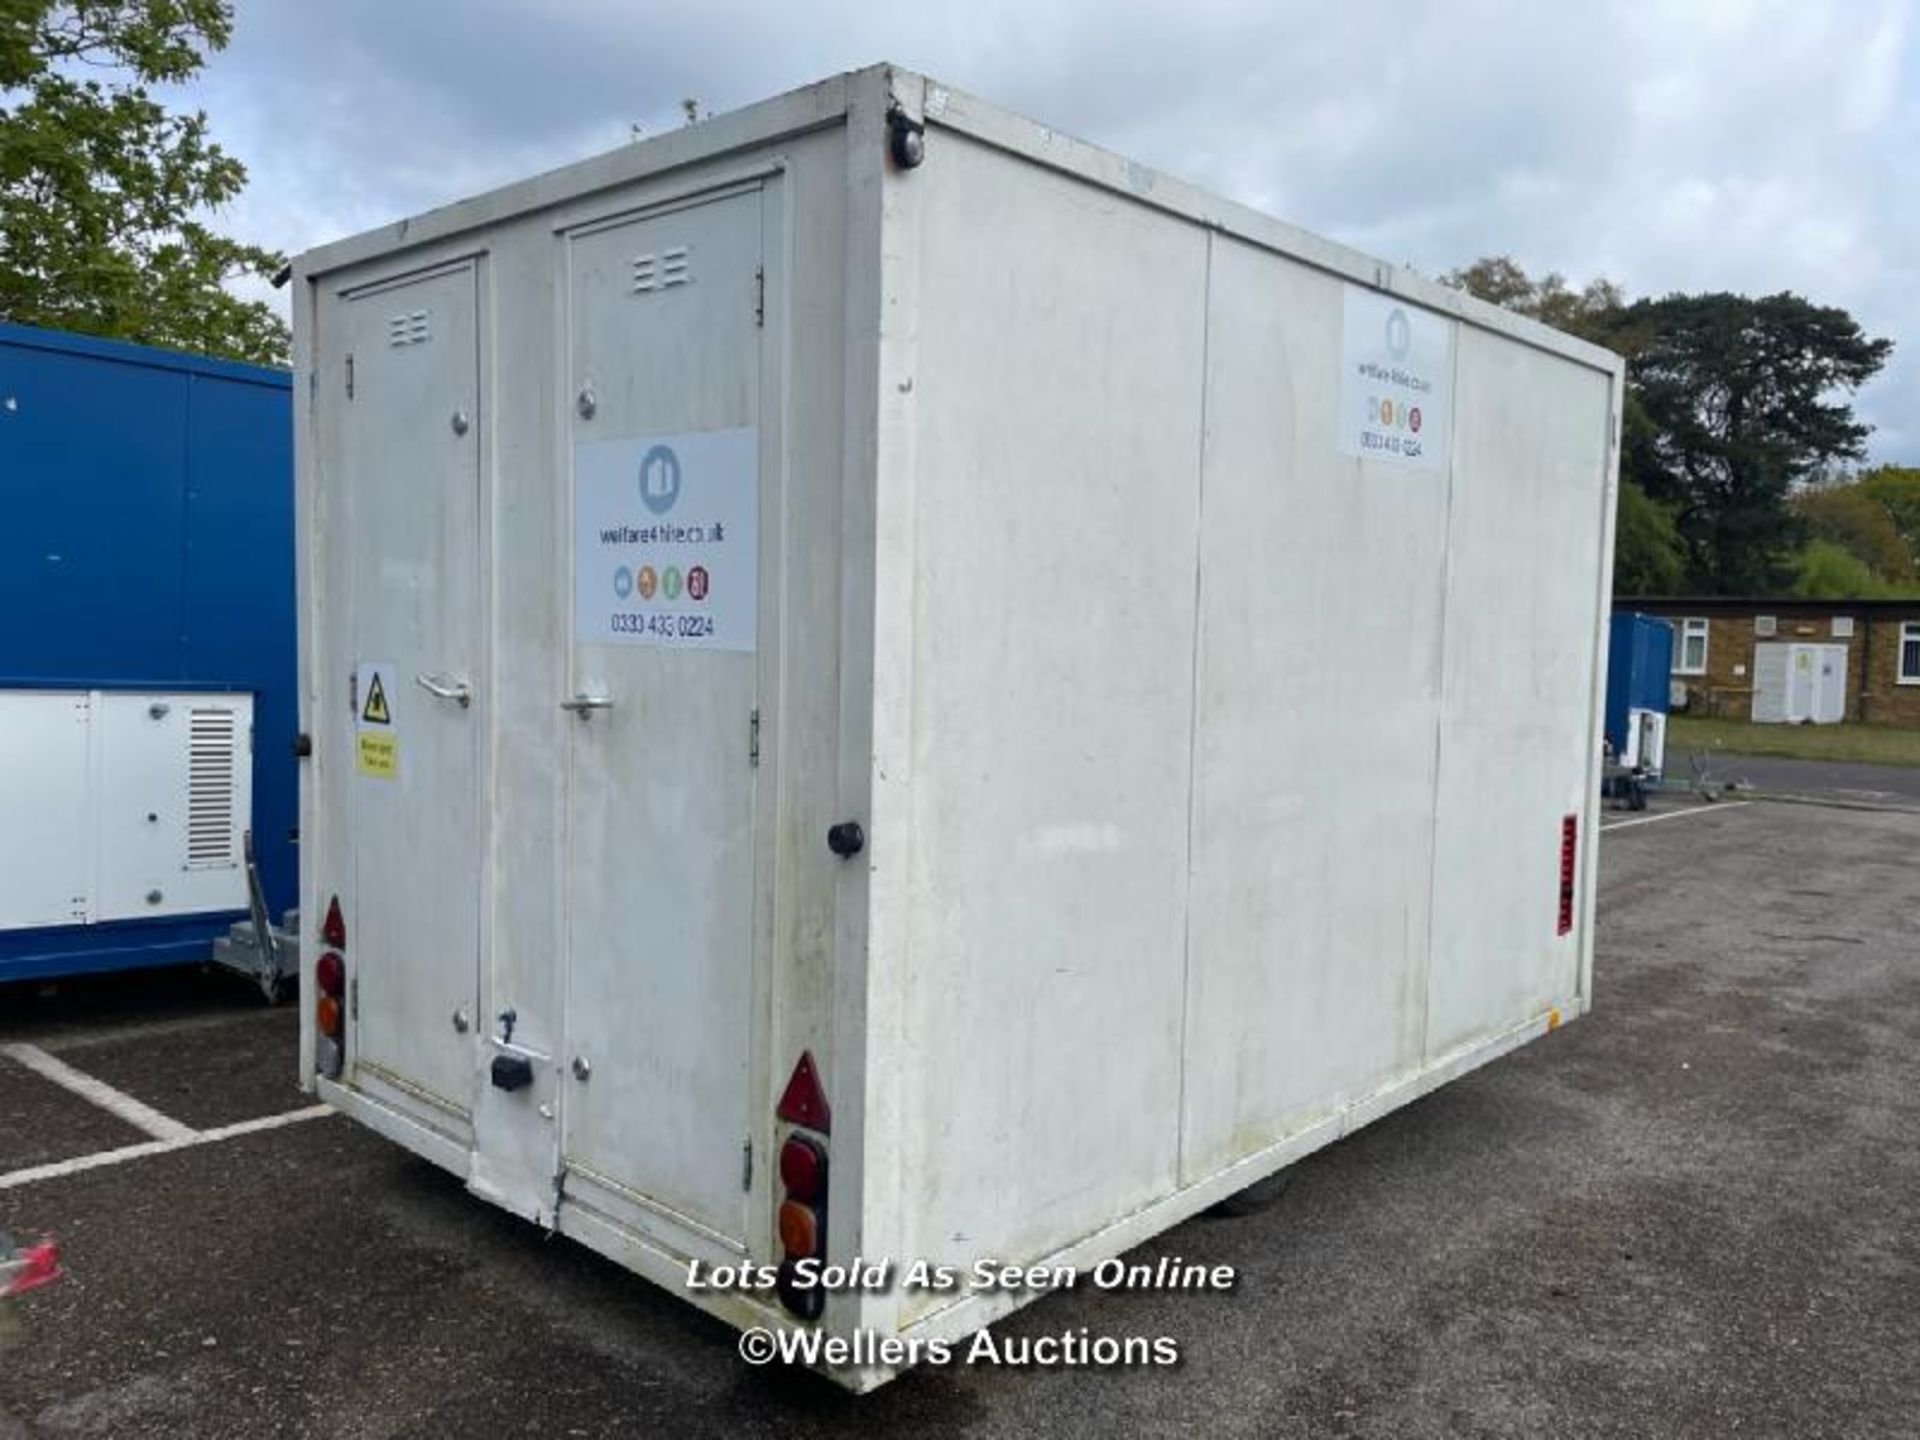 6 PERSON 12 X 7.5FT AJC EASY CABIN TOWABLE WELFARE UNIT, INCLUDES WASH BASIN, KETTLE, MICROWAVE, - Image 6 of 19